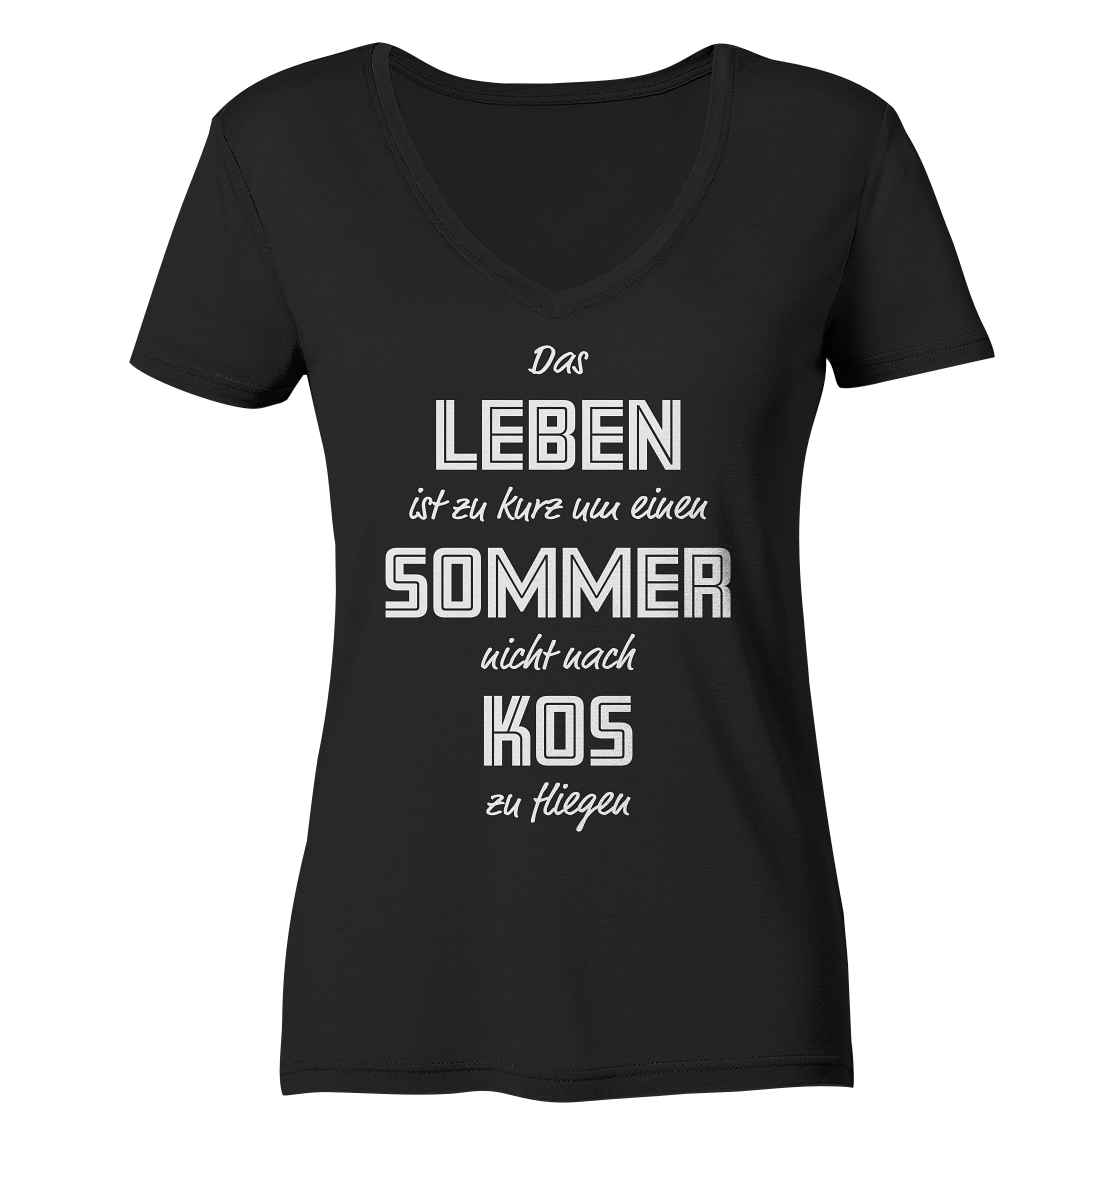 Life is too short not to fly to Kos for a summer - Ladies Organic V-Neck Shirt